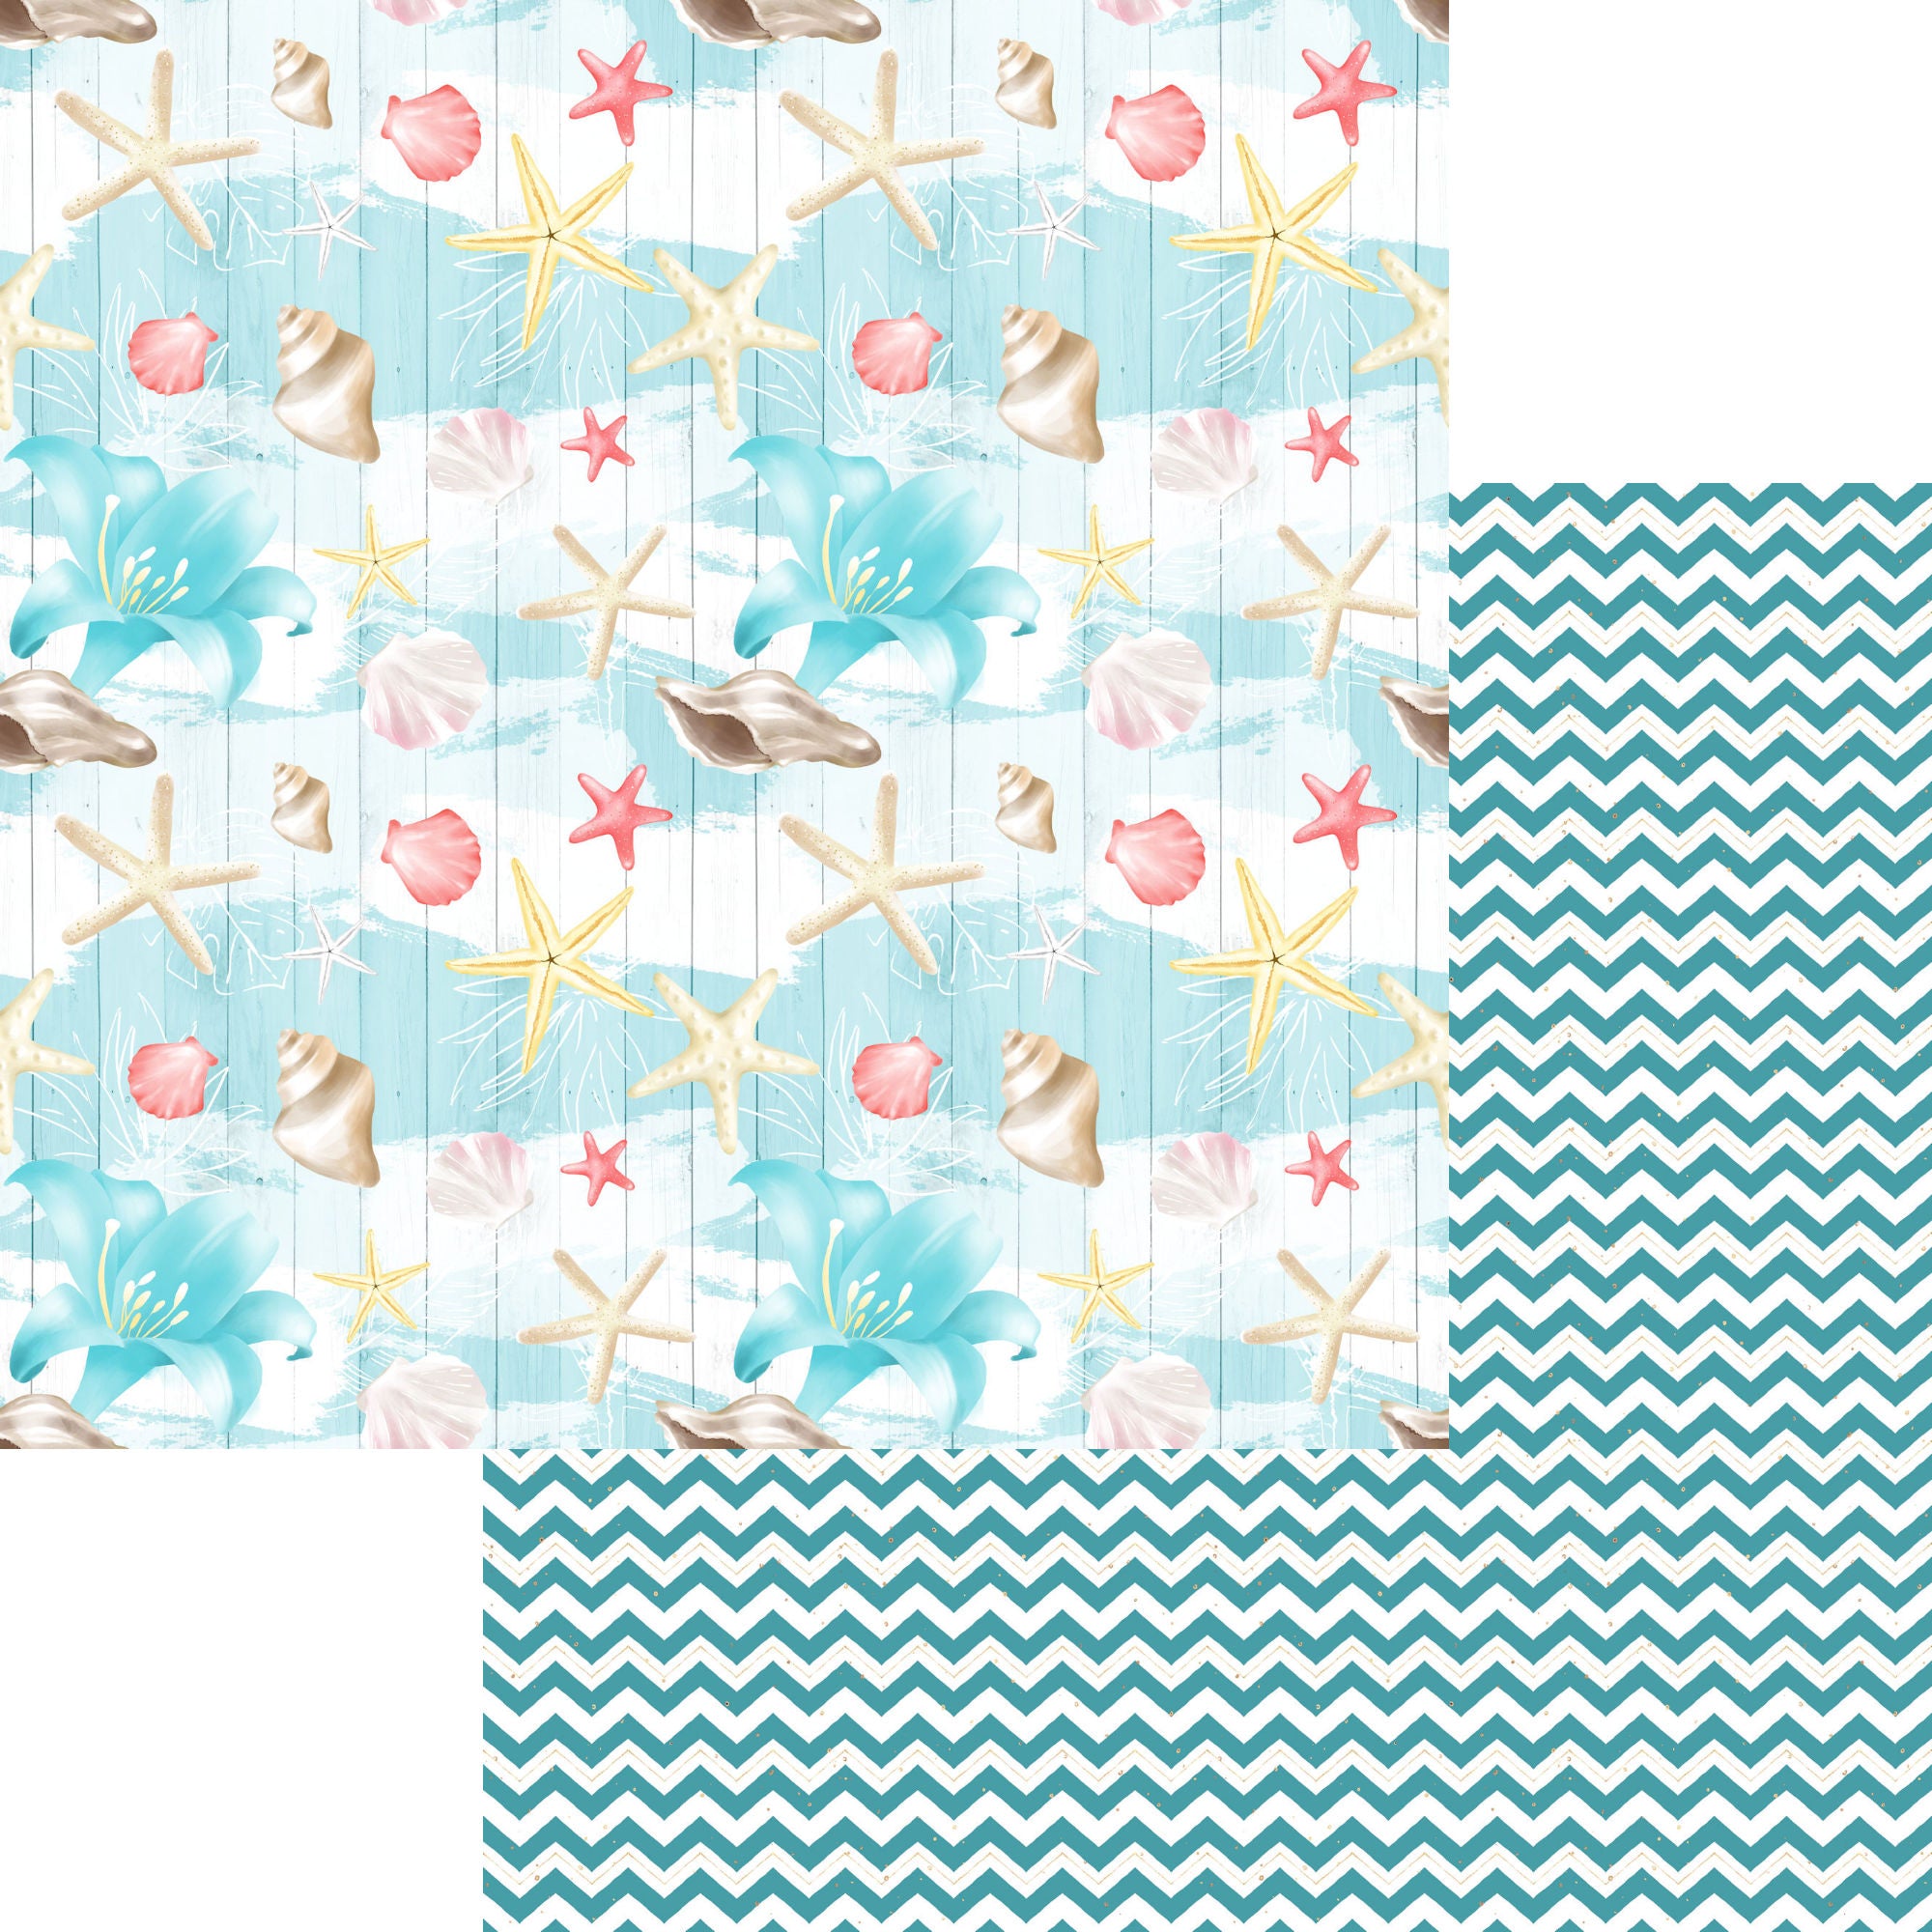 Nautical Summer Collection Seashell Collage 12 x 12 Double-Sided Scrapbook Paper by SSC Designs